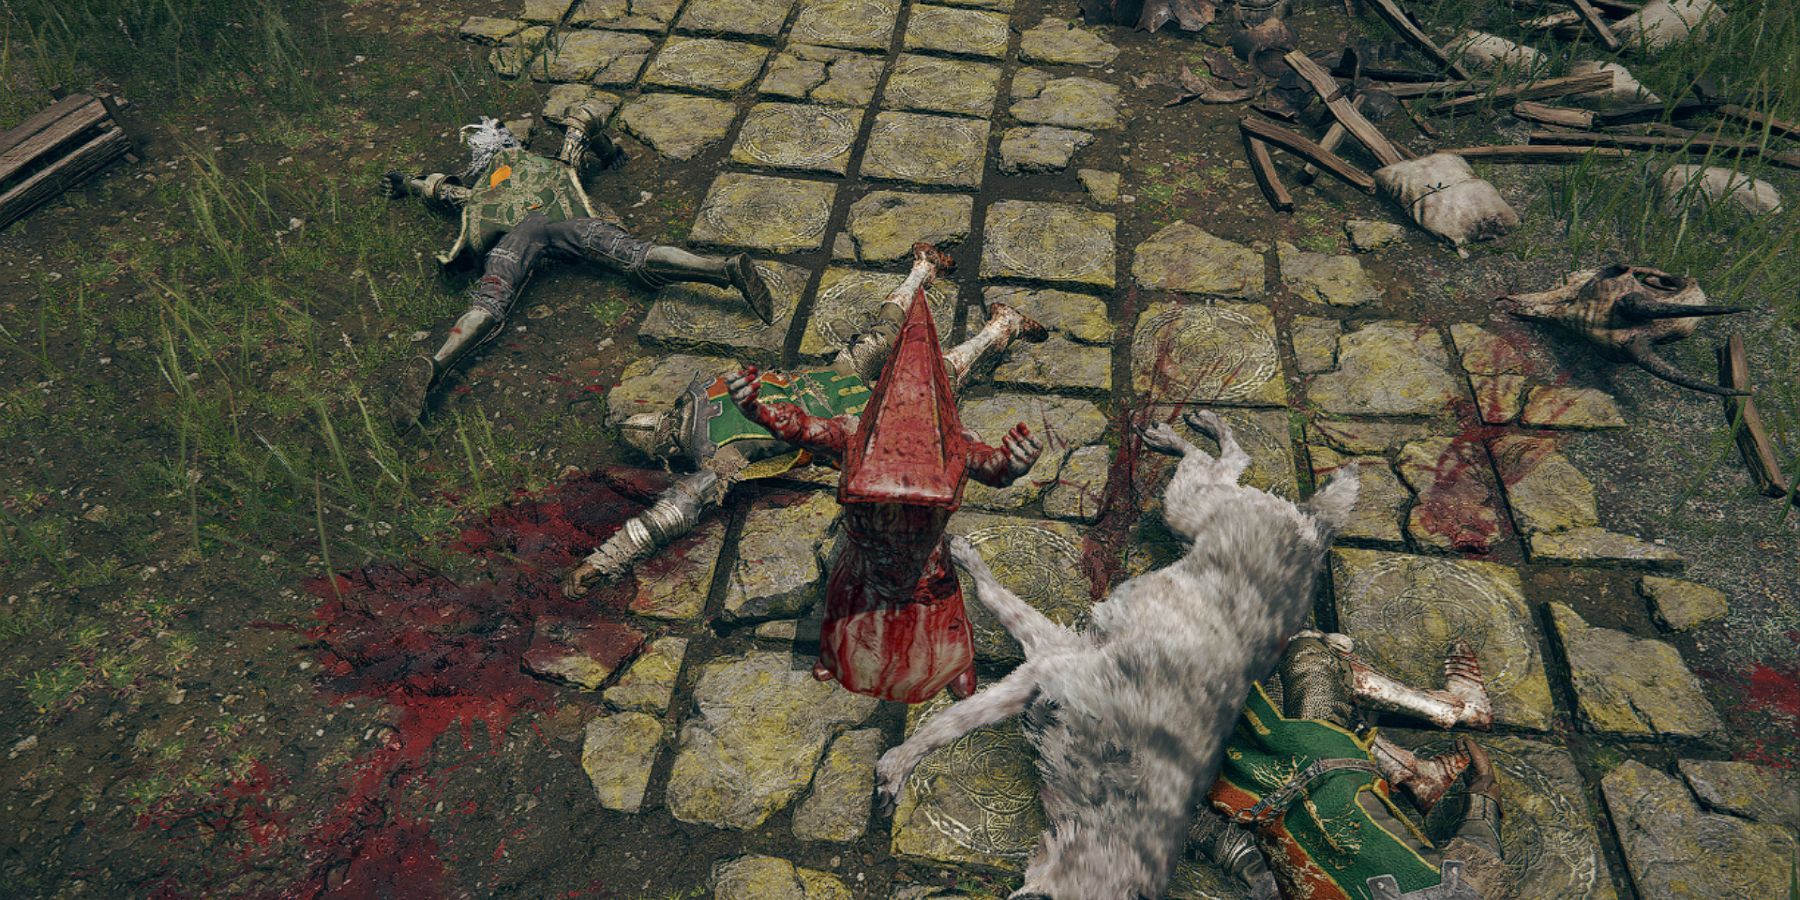 Image from Elden Ring showing Pyramid Head posing as corpses lie by his feet.